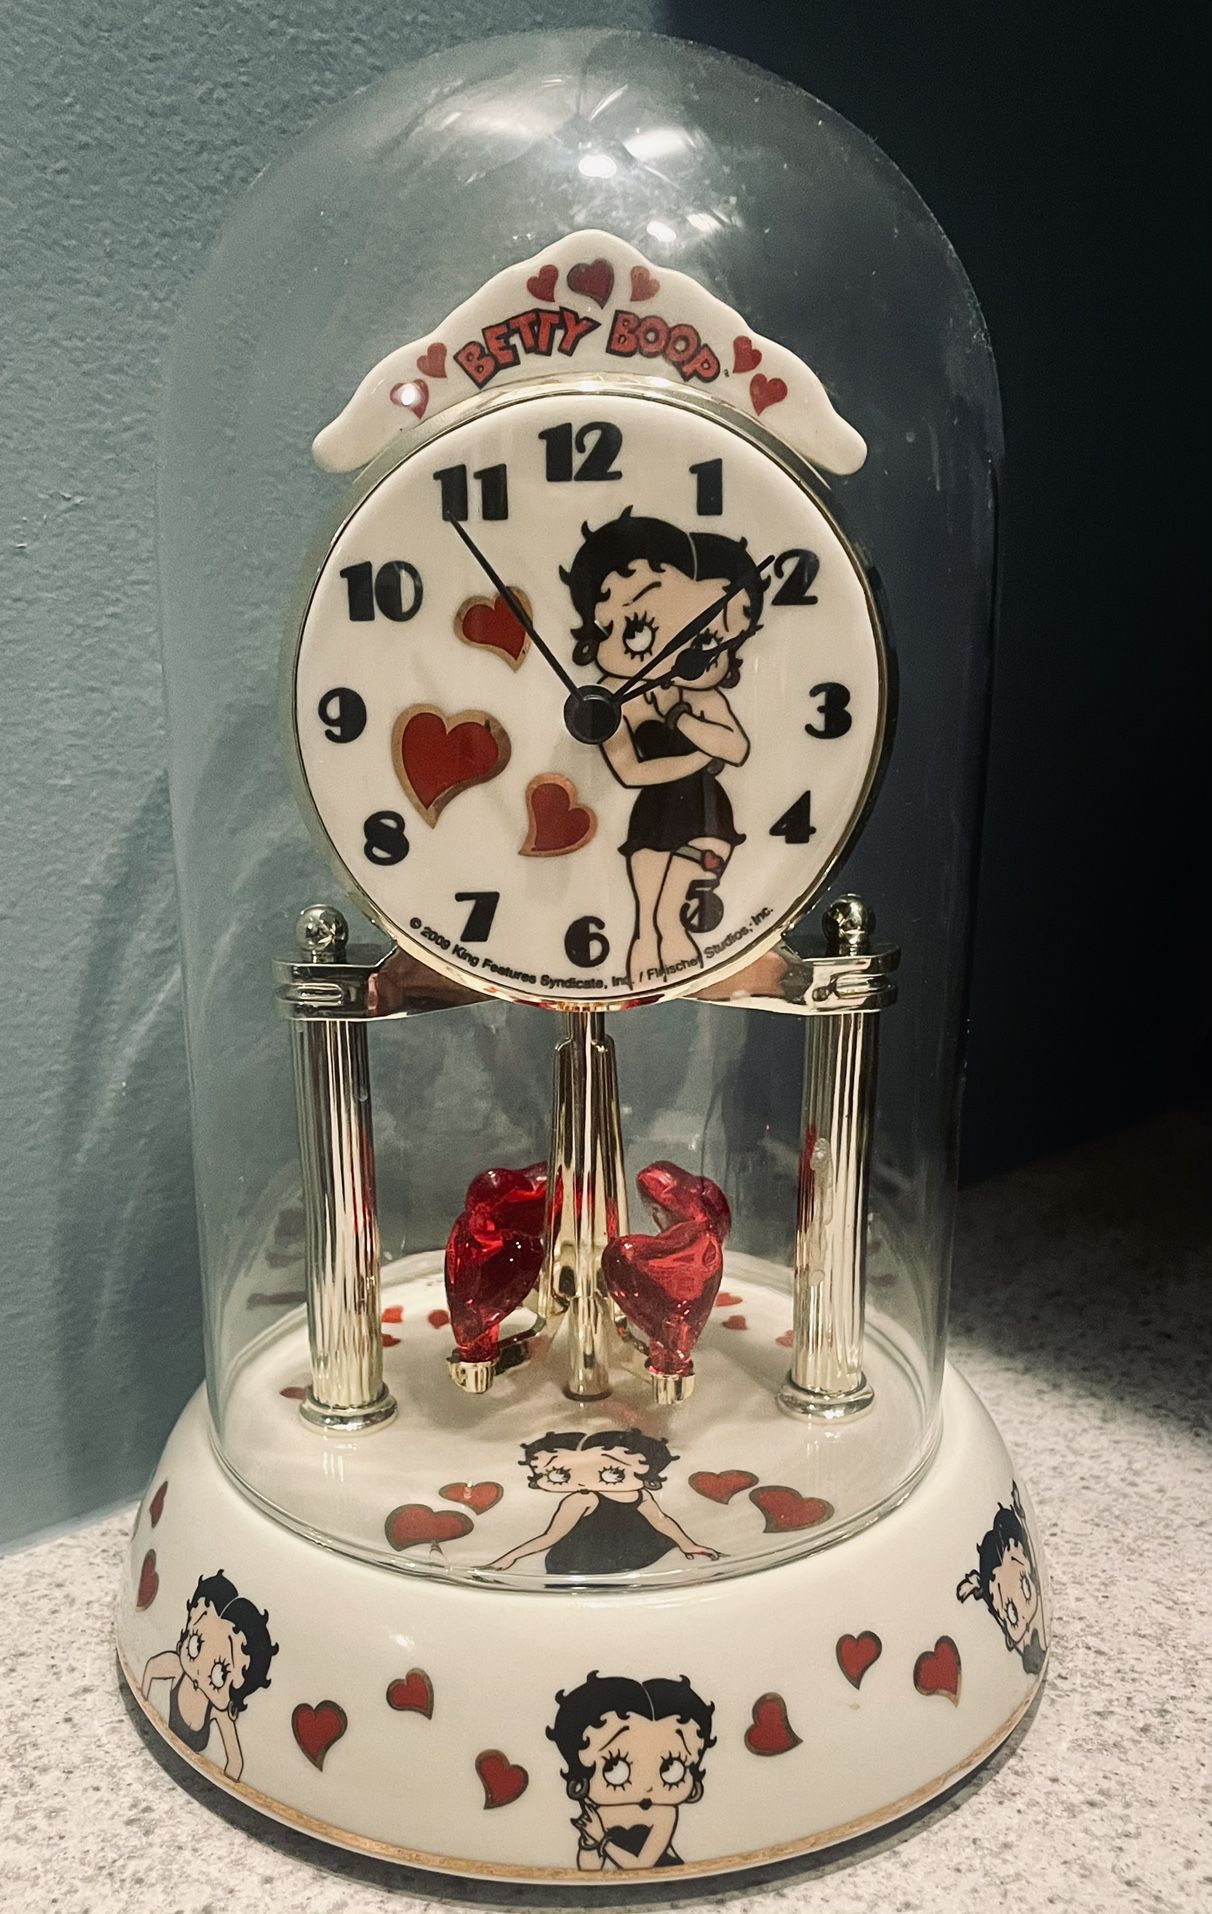 Vintage Betty Boop Porcelain Anniversary Clock With Dome And Circling Hearts 2009